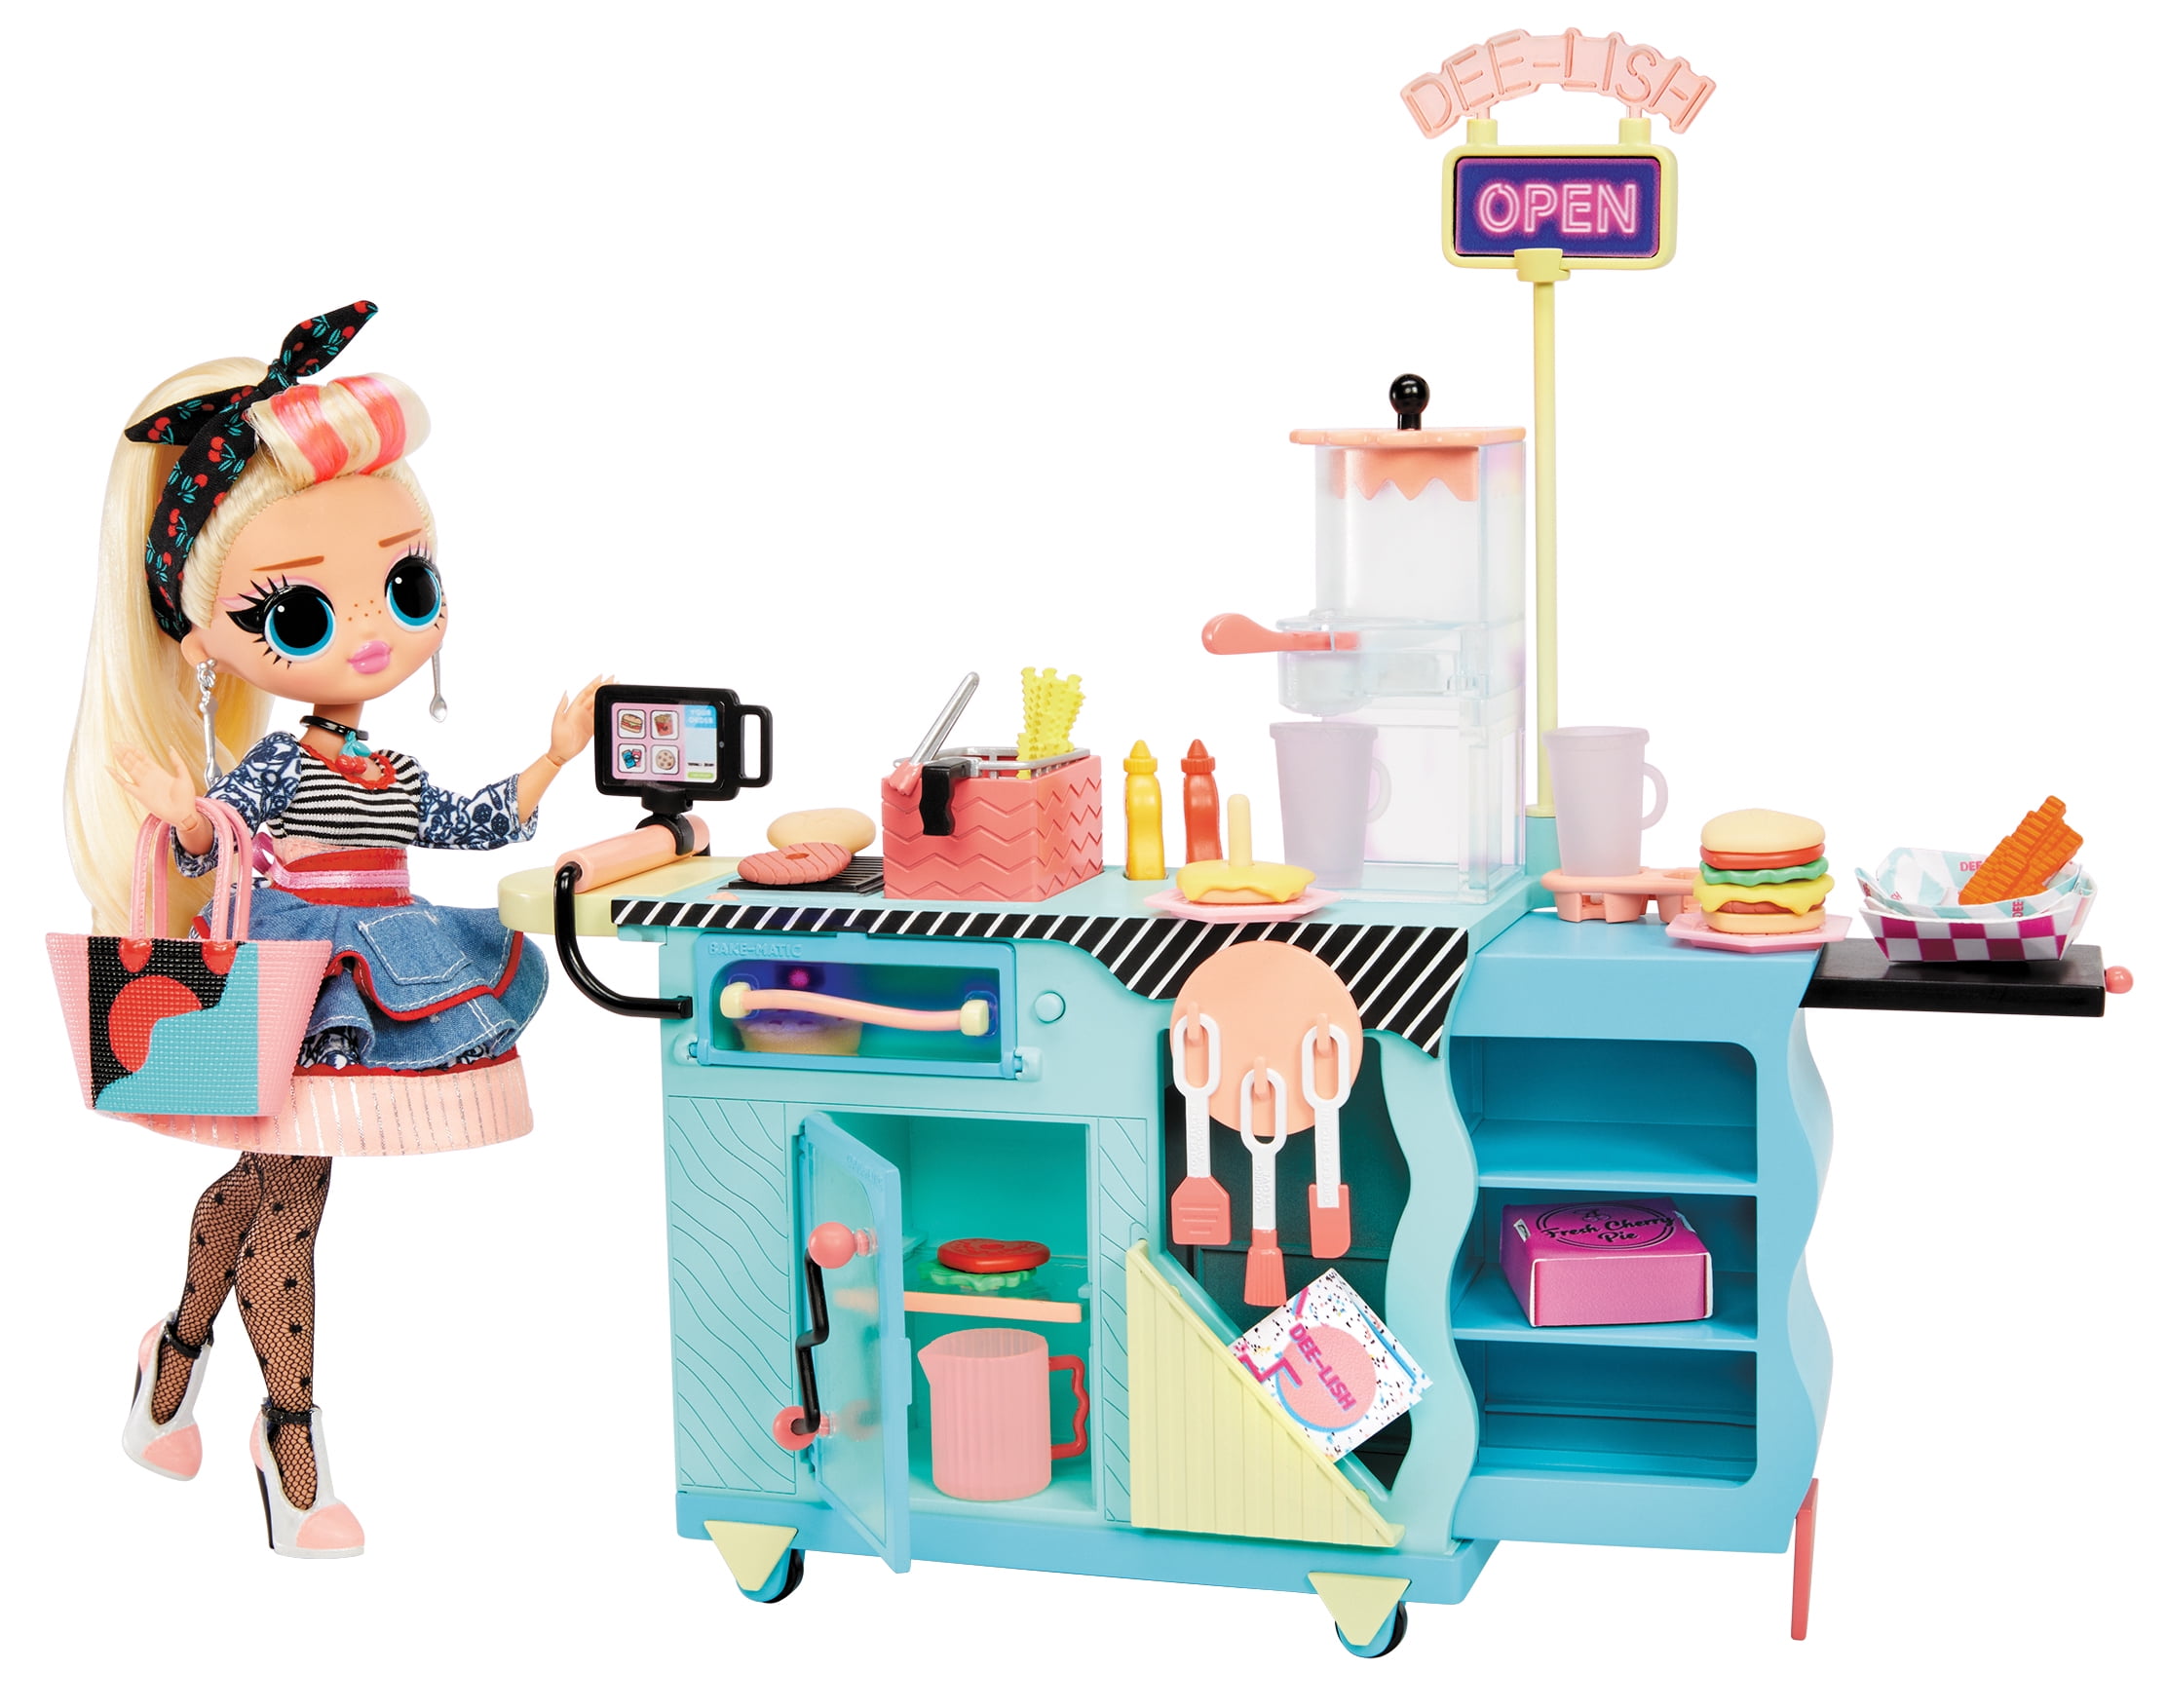 L.O.L Surprise! L.O.L. Surprise O.M.G. To-Go Diner Playset with 45+ Surprises Including Color Change Features and Exclusive Fashion Doll, Miss Sundae – Great Gift for Kids Ages 4+